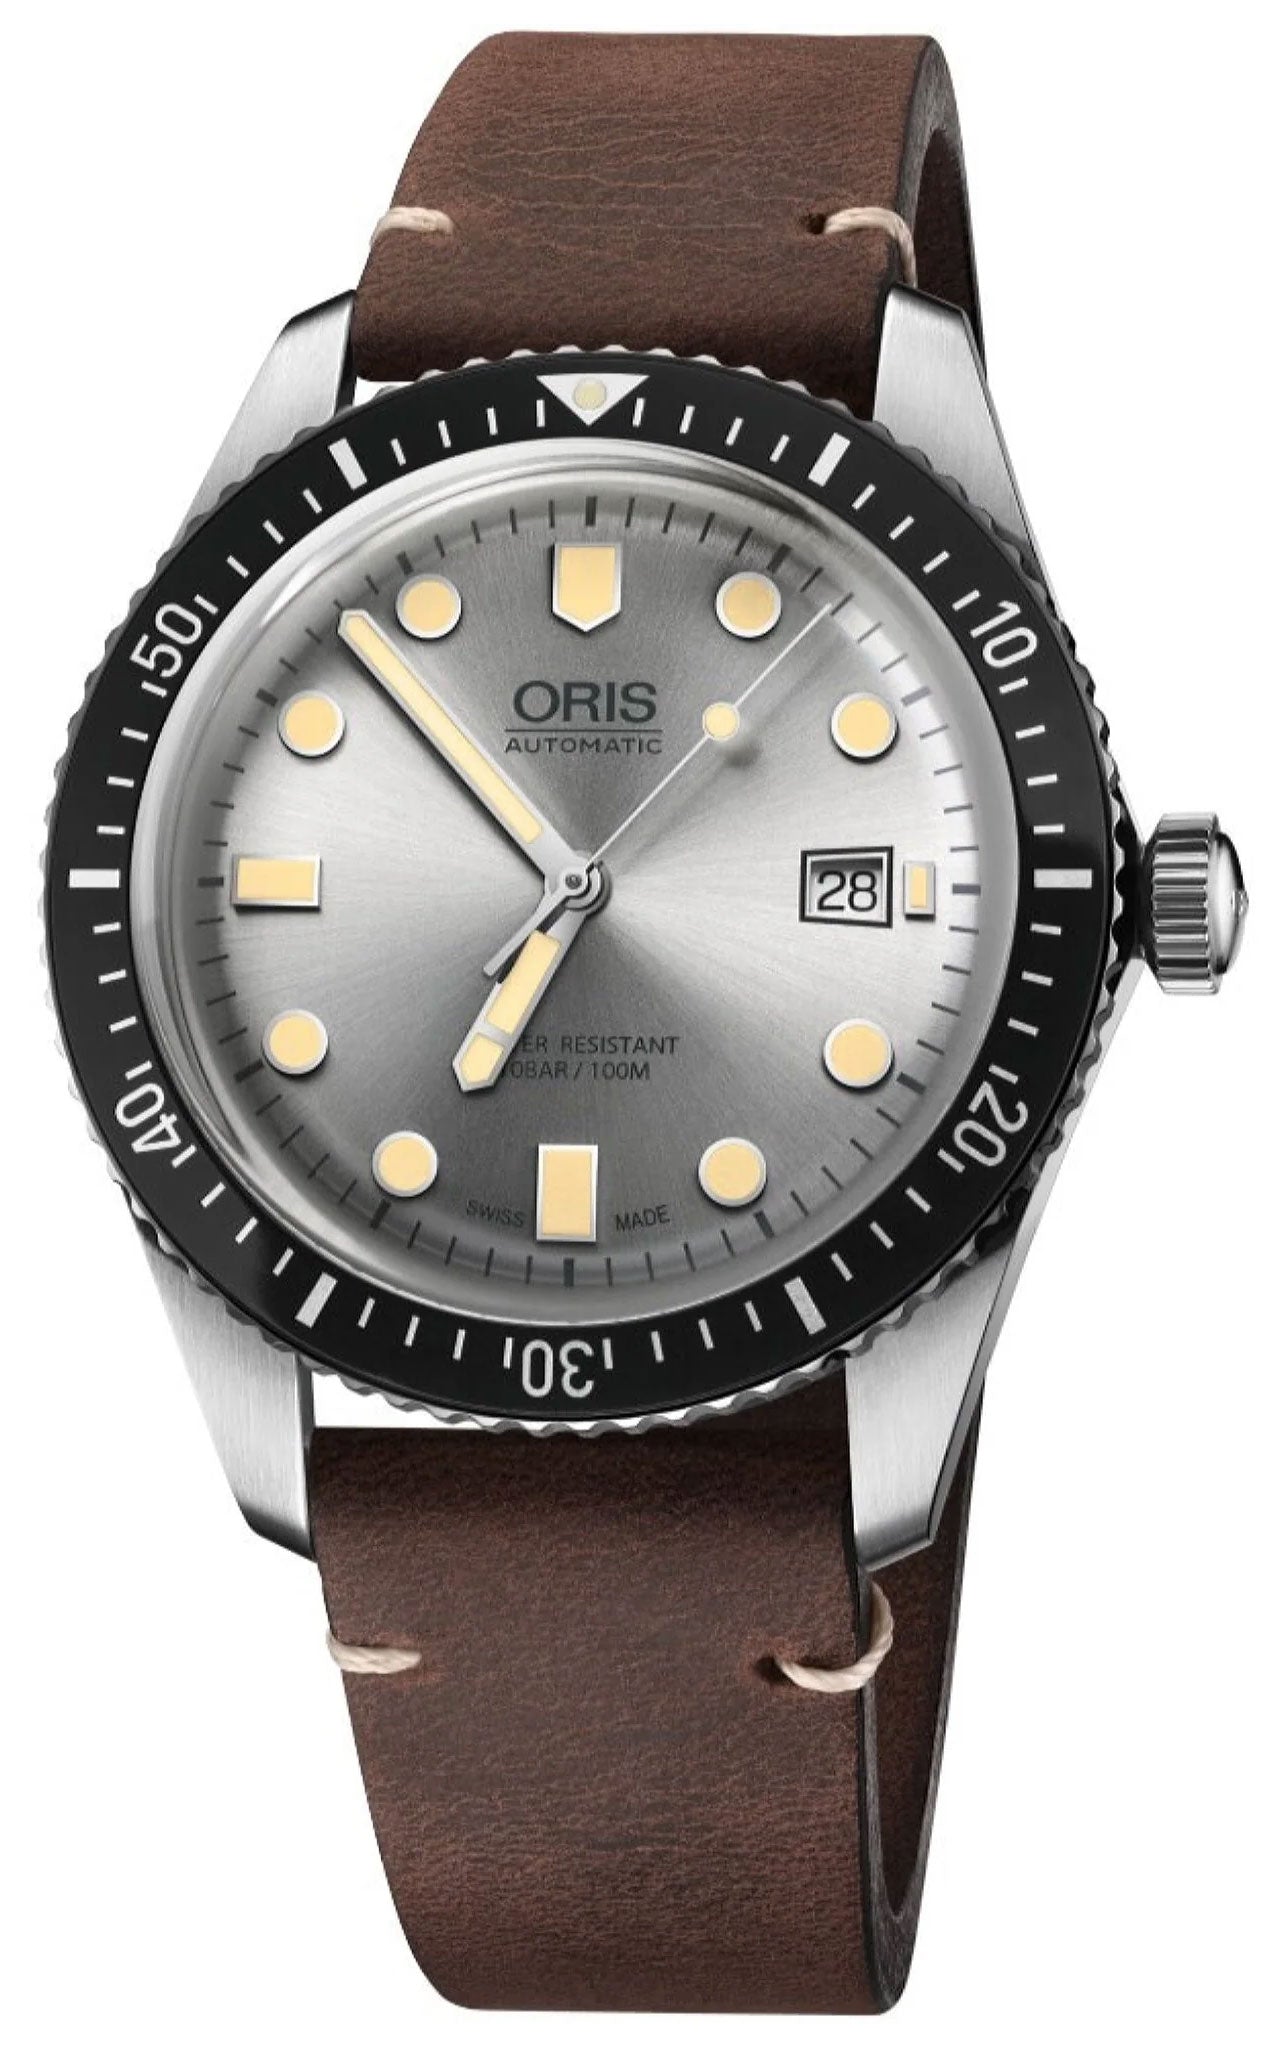 update alt-text with template Watches - Mens-Oris-733 7720 4051-LS-40 - 45 mm, date, Divers Sixty-Five, leather, mens, menswatches, new arrivals, Oris, round, rpSKU_733 7707 4357-LS, rpSKU_733 7730 4153-RS, rpSKU_733 7730 4153-RS-Red, rpSKU_733 7730 7153-RS-Grey, silver-tone, stainless steel case, swiss automatic, uni-directional rotating bezel, watches-Watches & Beyond